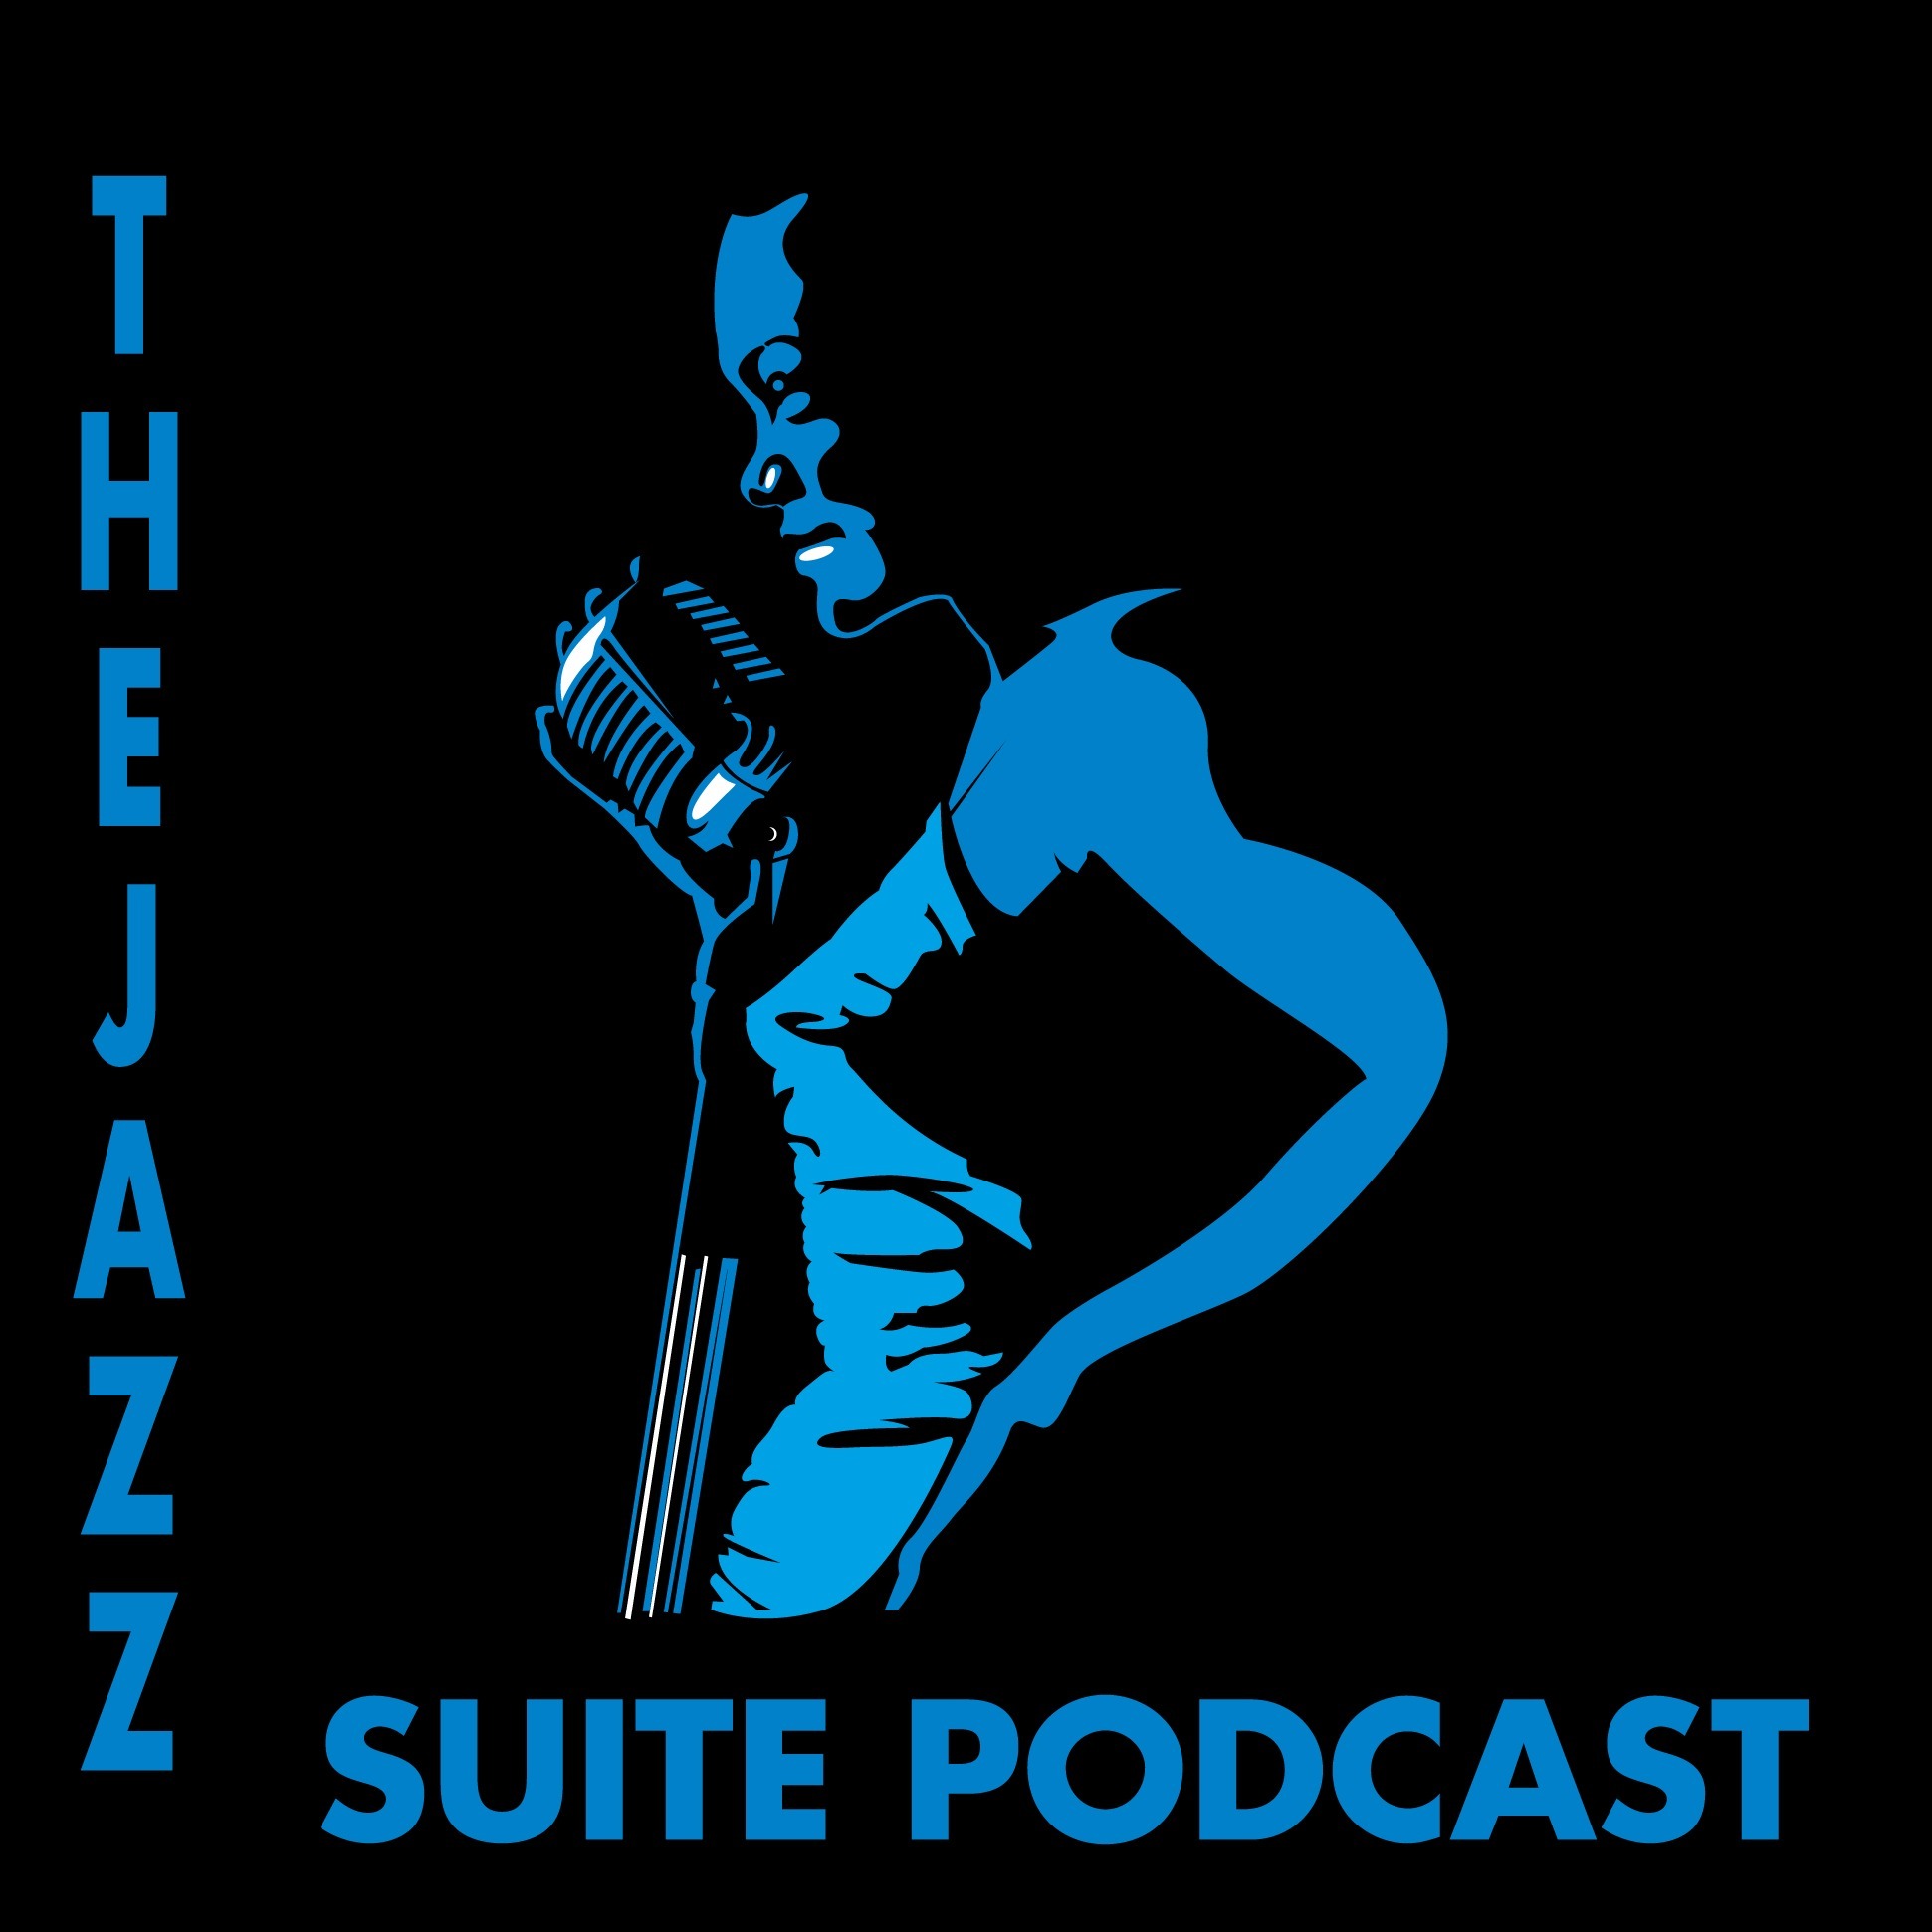 The Jazz Suite Podcast Show #461